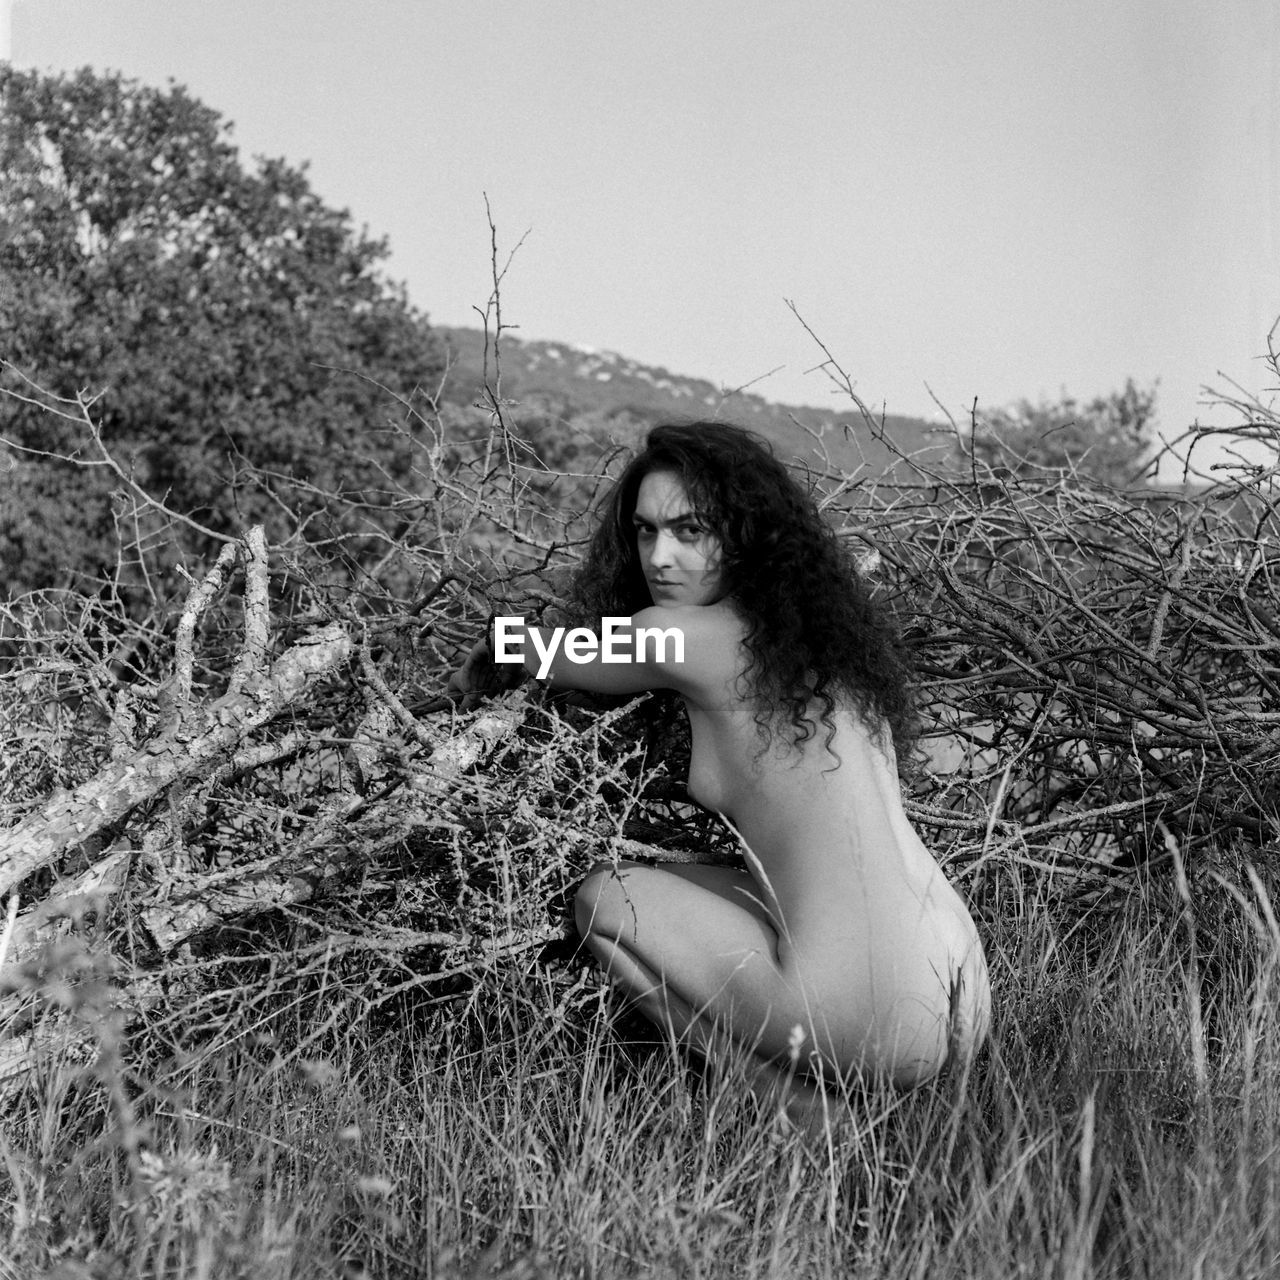 Portrait of naked woman crouching on field